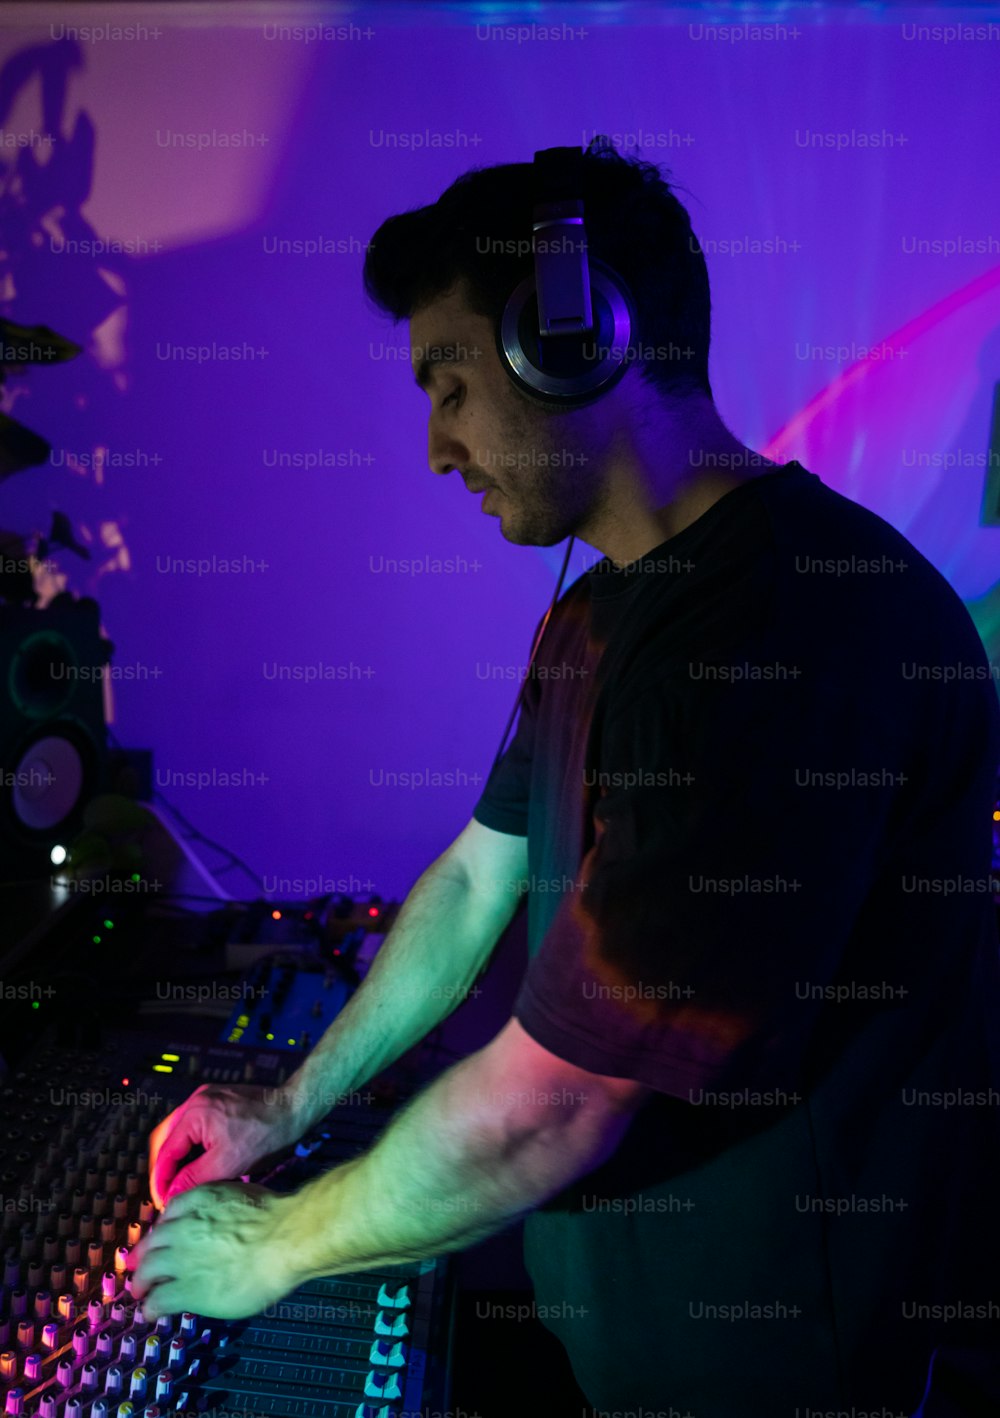 a man with headphones on mixing in a music studio